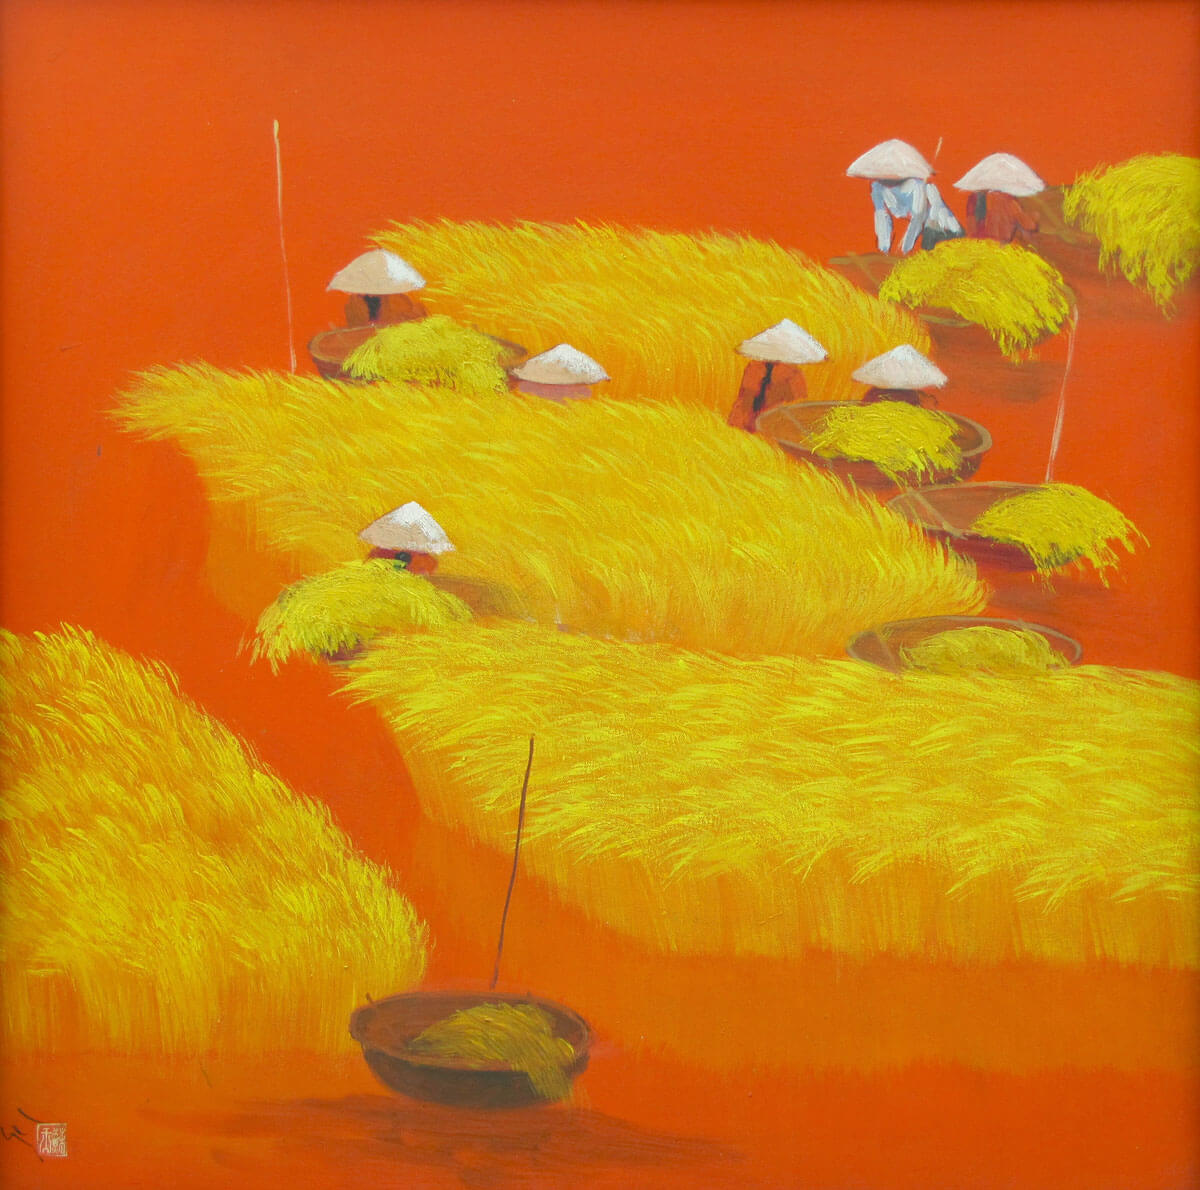 Working on the rice field 06 -Vietnamese Painting